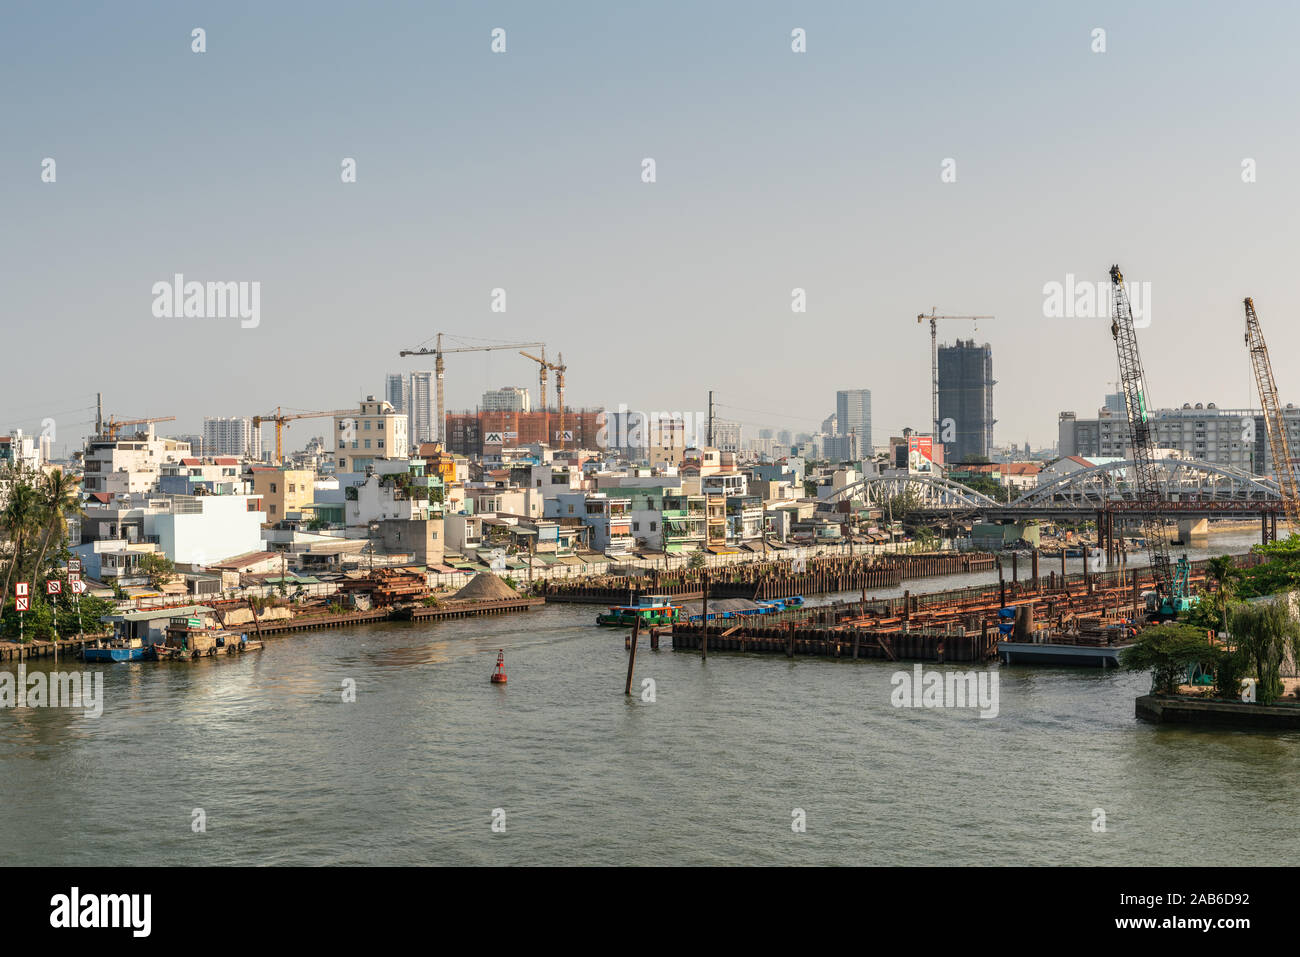 Ho Chi Minh City, Vietnam - March 13, 2019: Downtown port on Song Sai Gon river at sunset. Where Kenh Te canal connects we find harbor instatllations Stock Photo